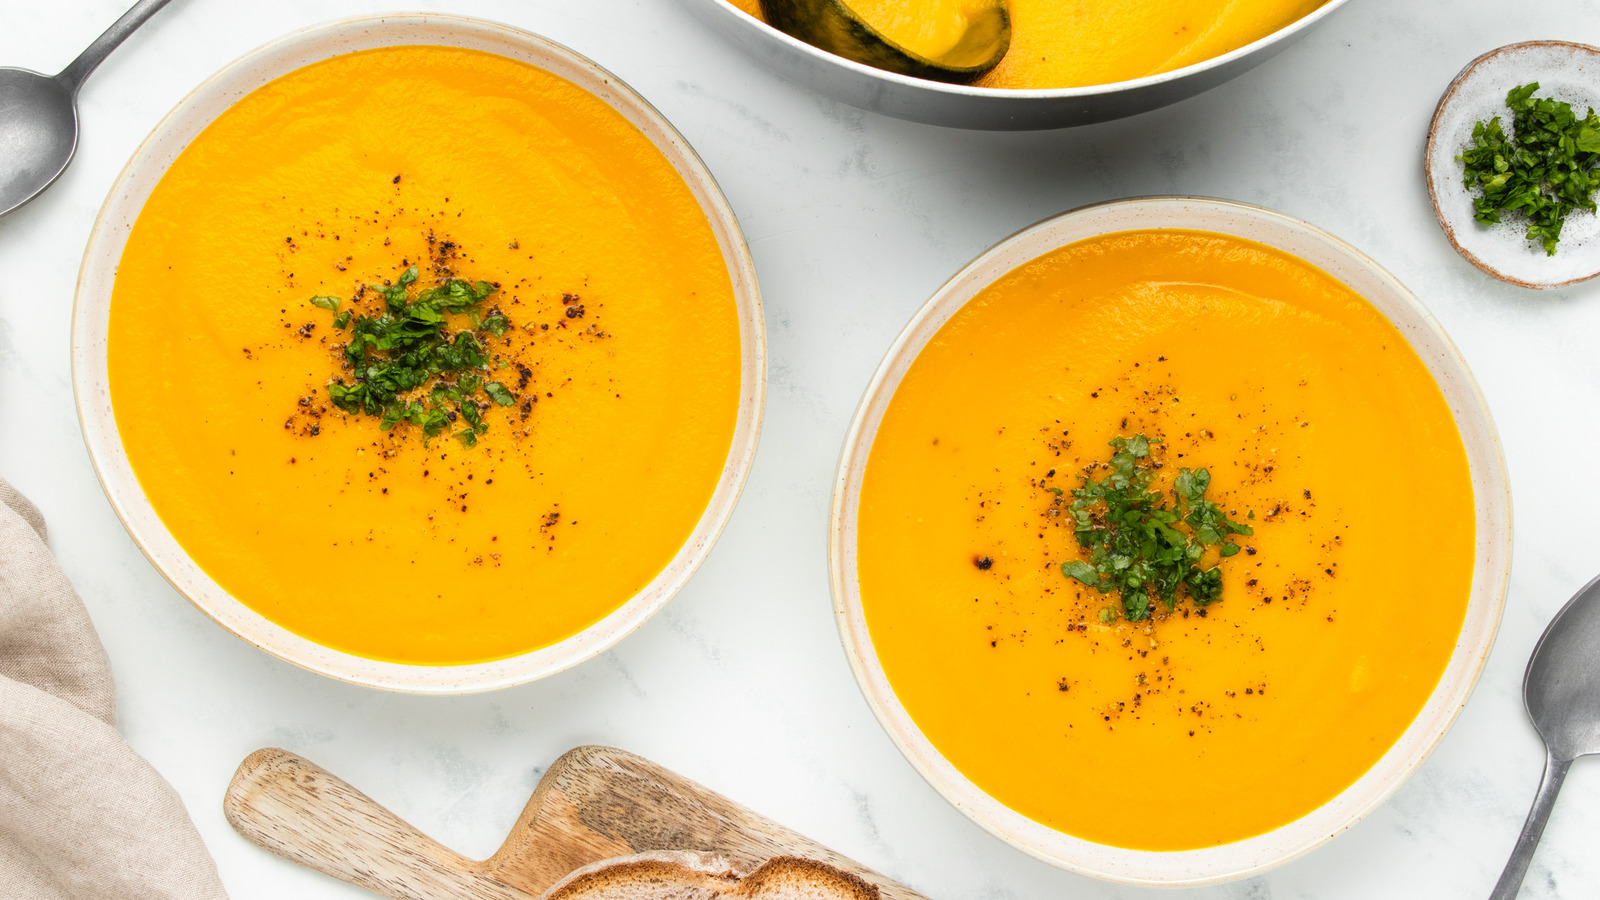 https://www.mashed.com/img/gallery/silky-smooth-carrot-ginger-soup-recipe/l-intro-1692039240.jpg